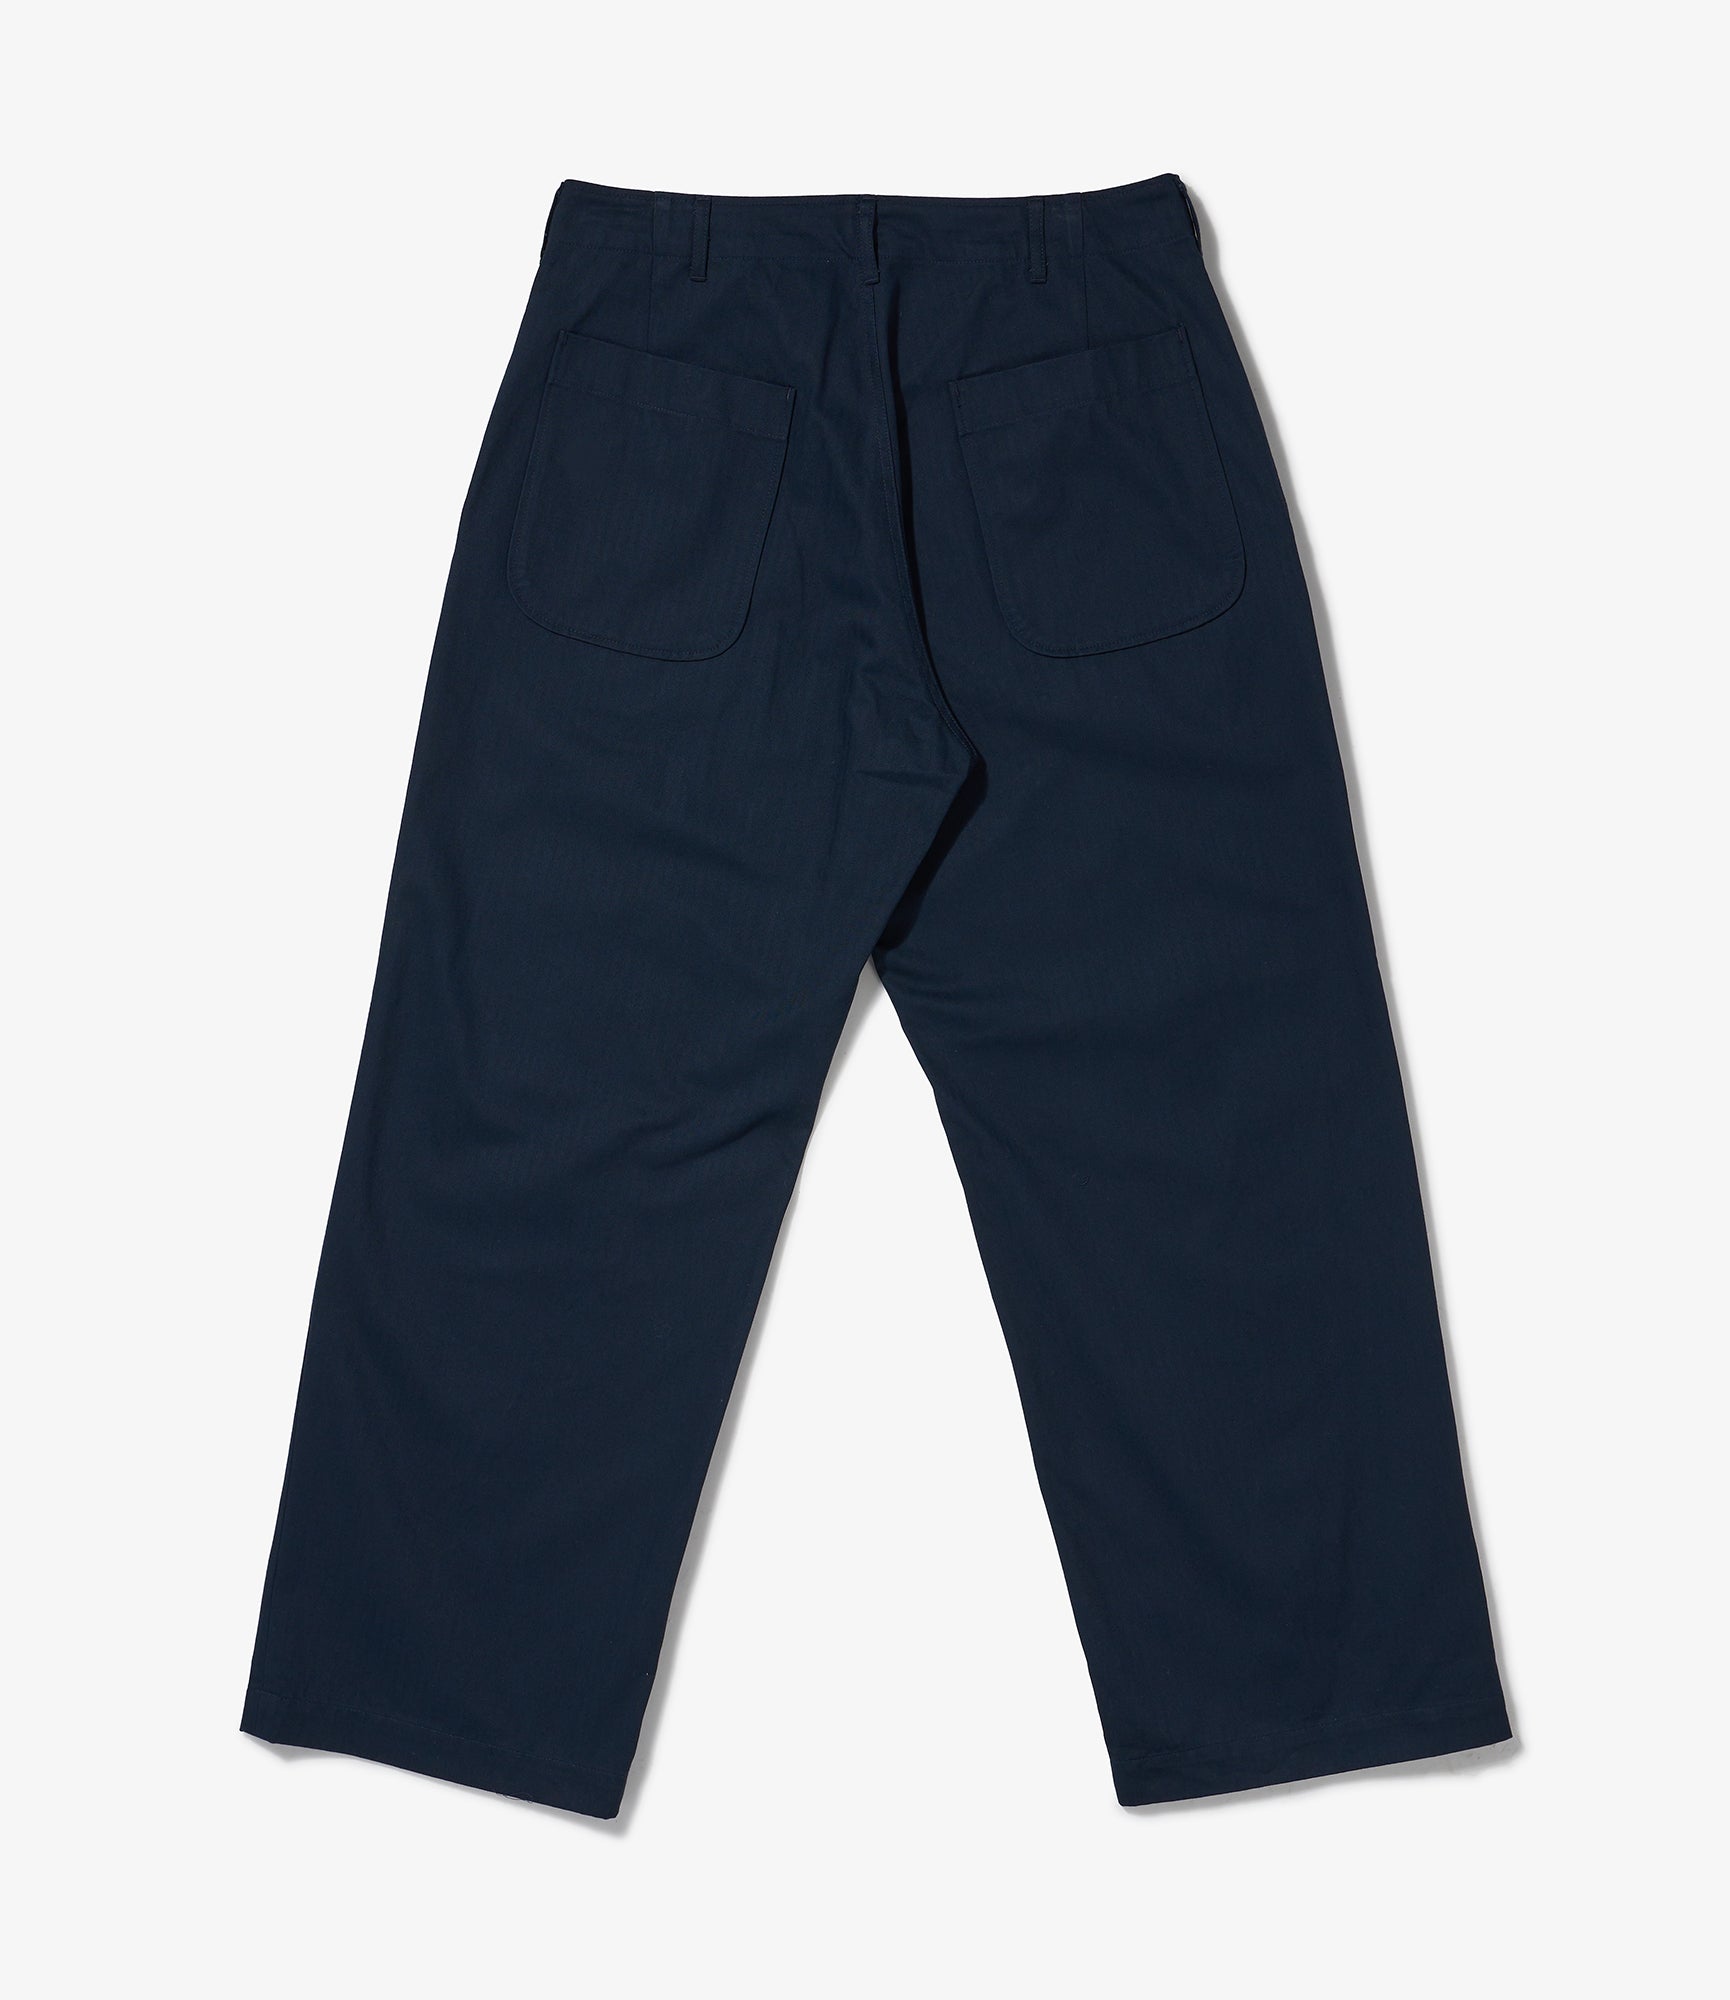 Nepenthes Special - Sailor Pant -  Dk. Navy Cotton Herringbone Twill